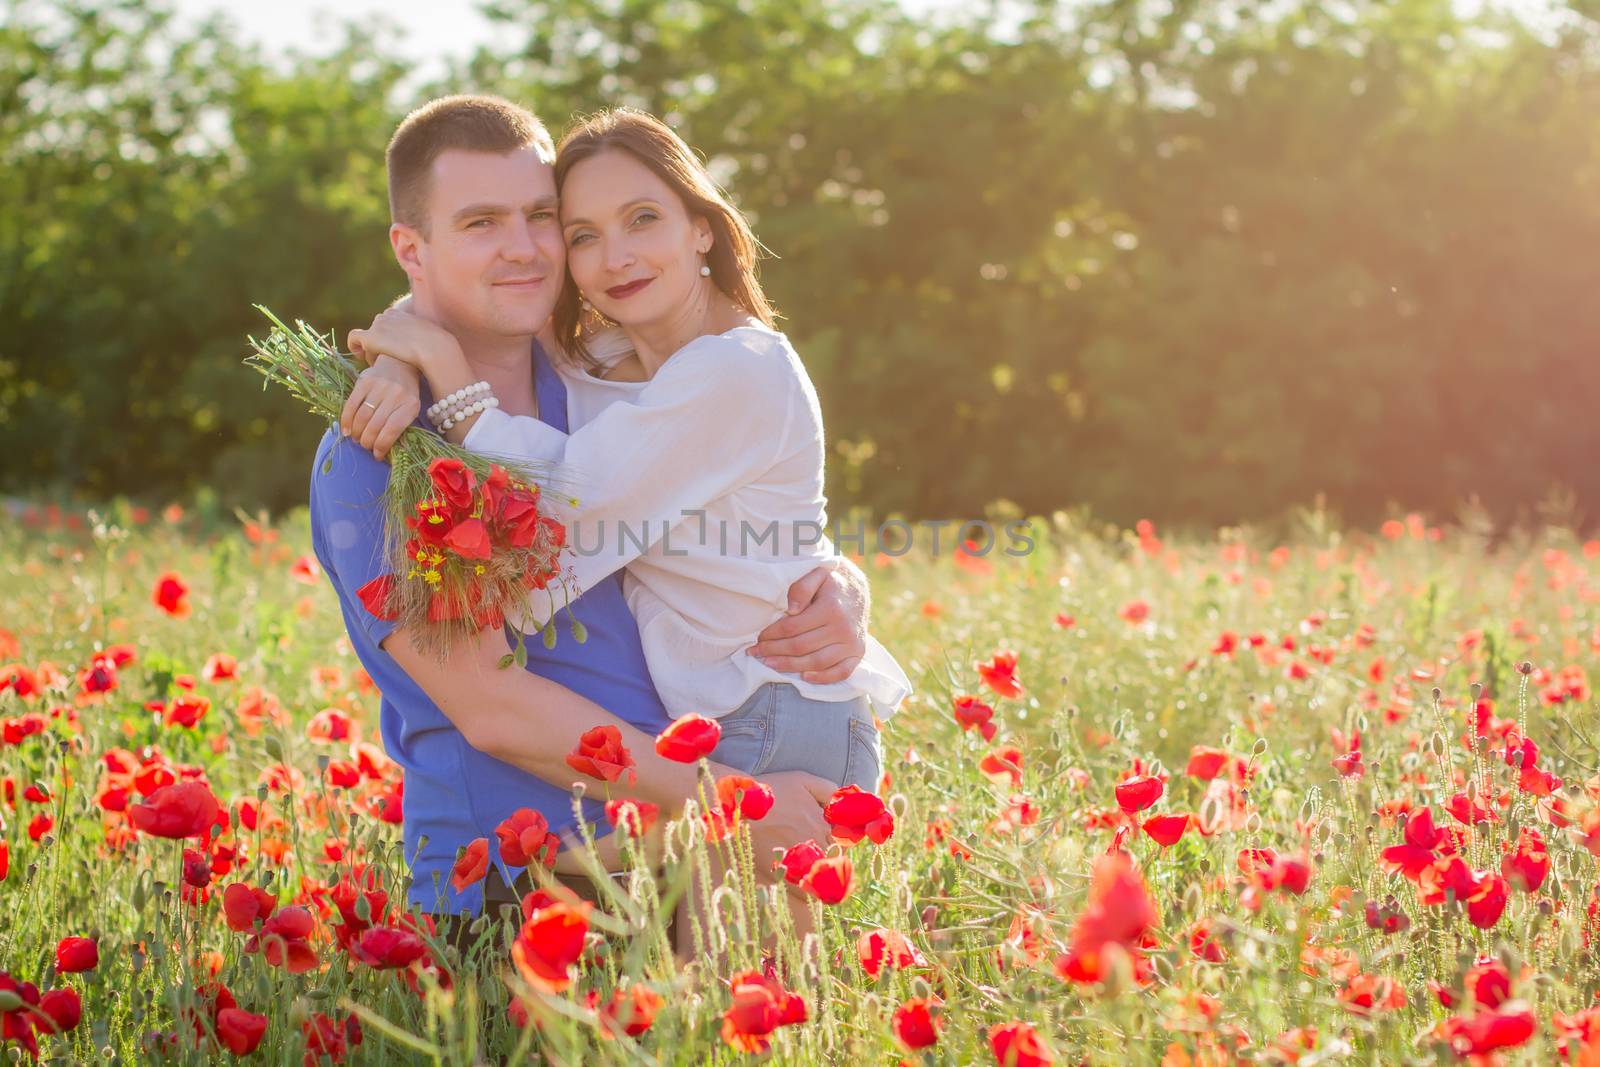 Couple among poppy field embracing and smiling nose-to-nose by Angel_a